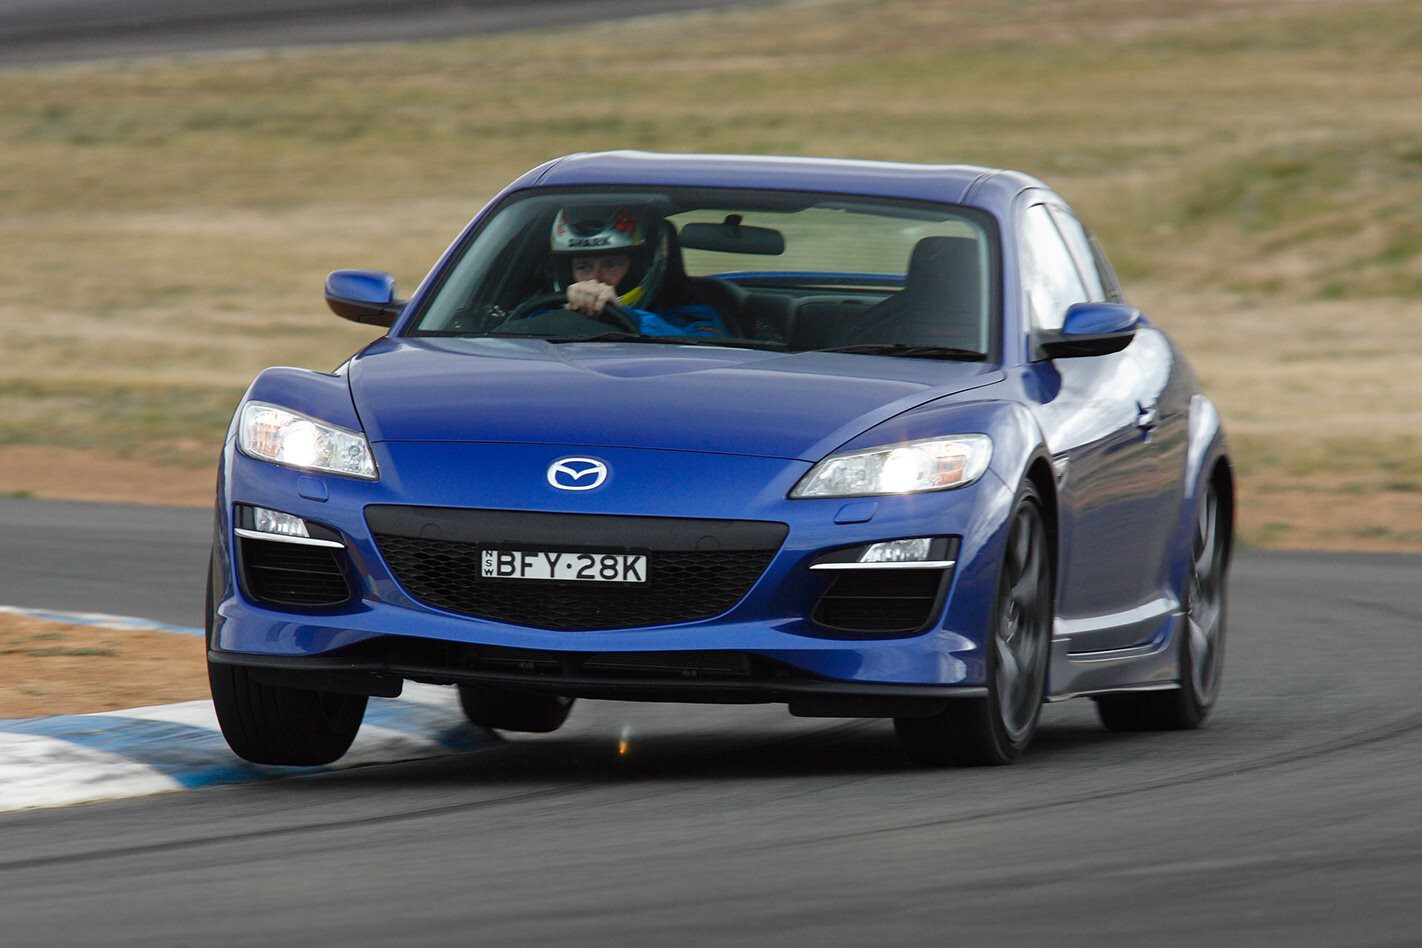 Mazda Rx 8 Gt At Performance Car Of The Year 08 Classic Motor